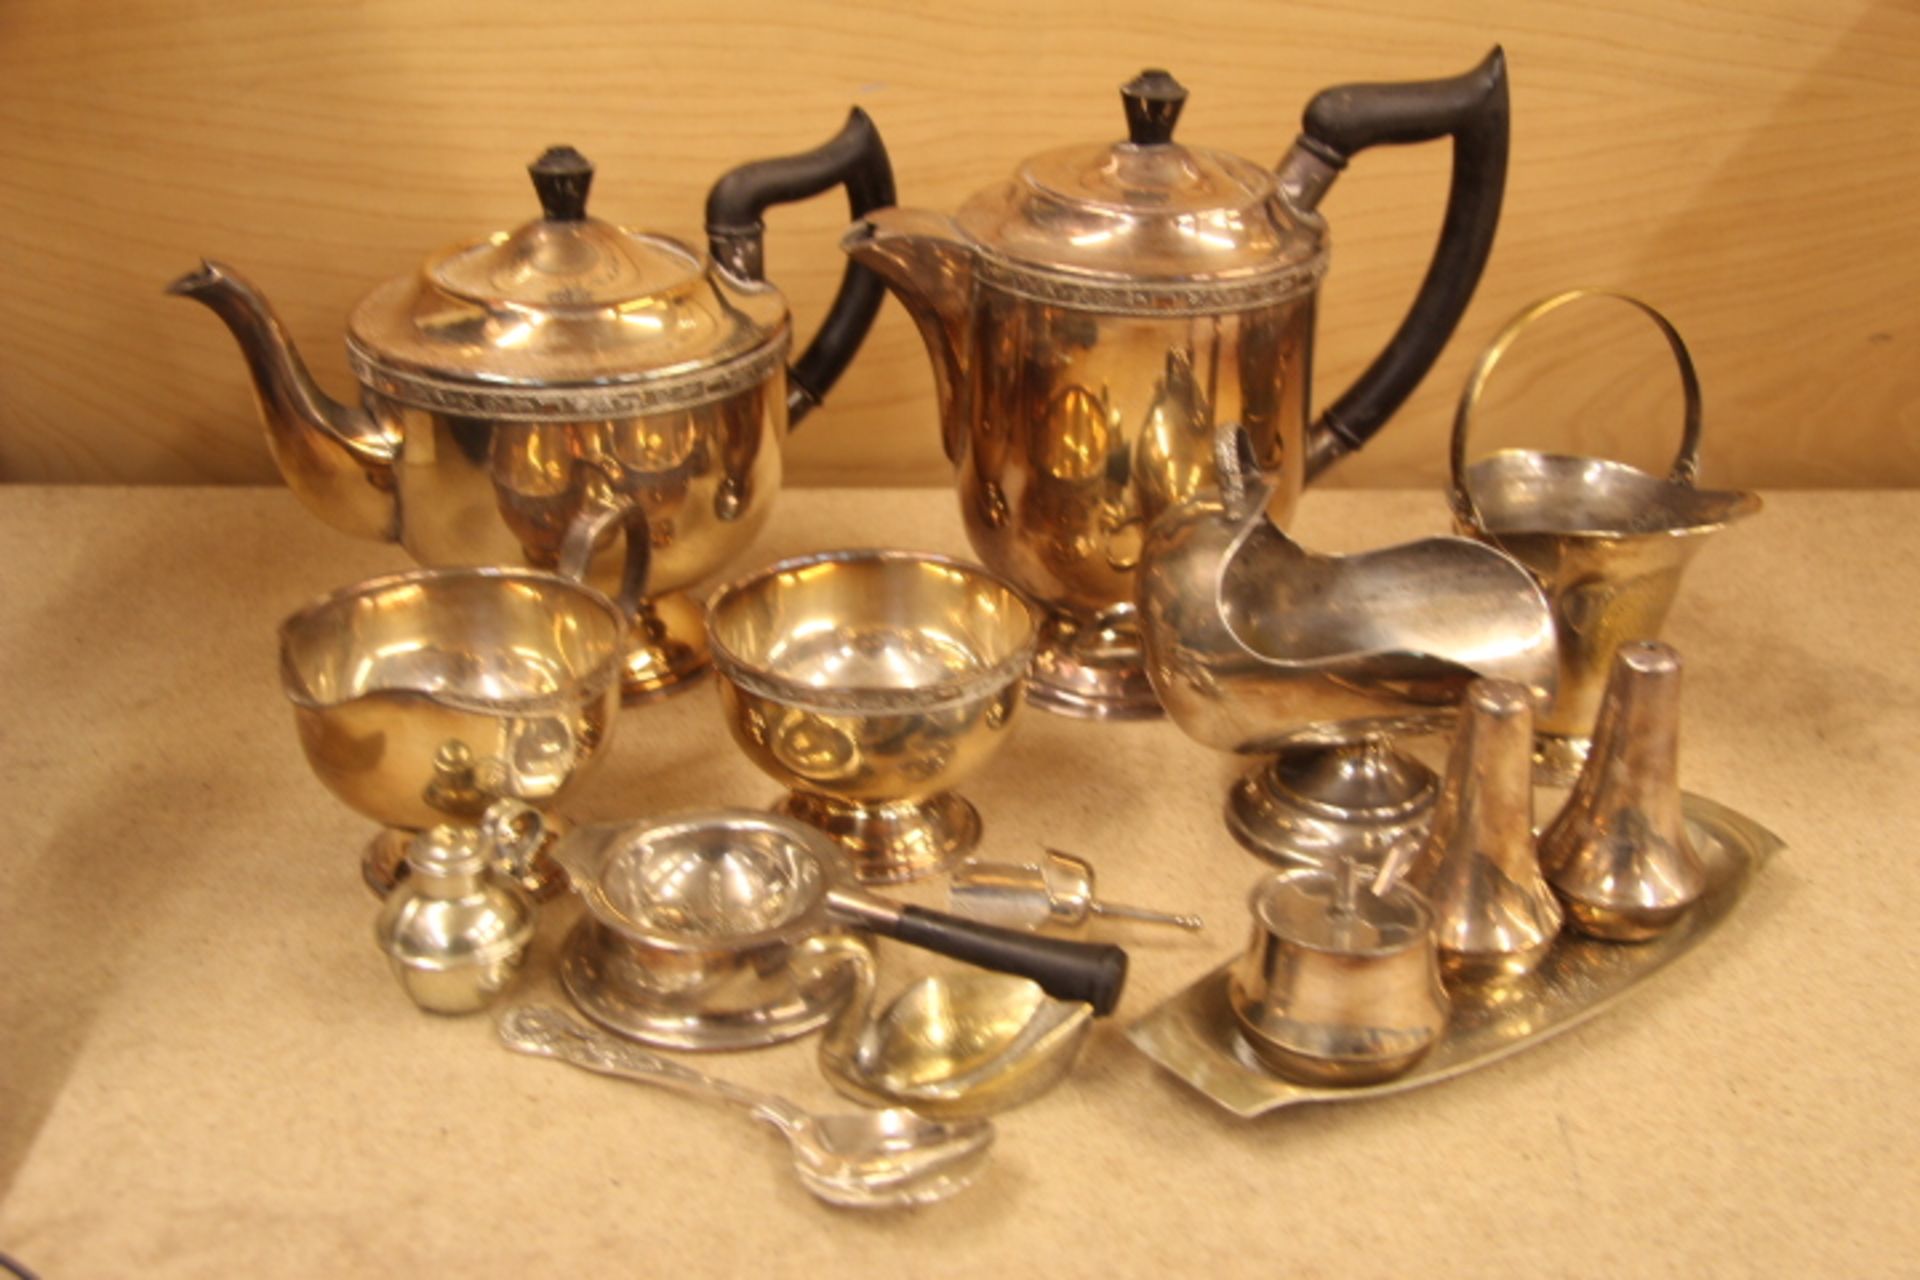 Grade U Viners Silver Plated On Copper Oval Tray With A Selection Of Plated Items Including Teapot- - Image 2 of 2